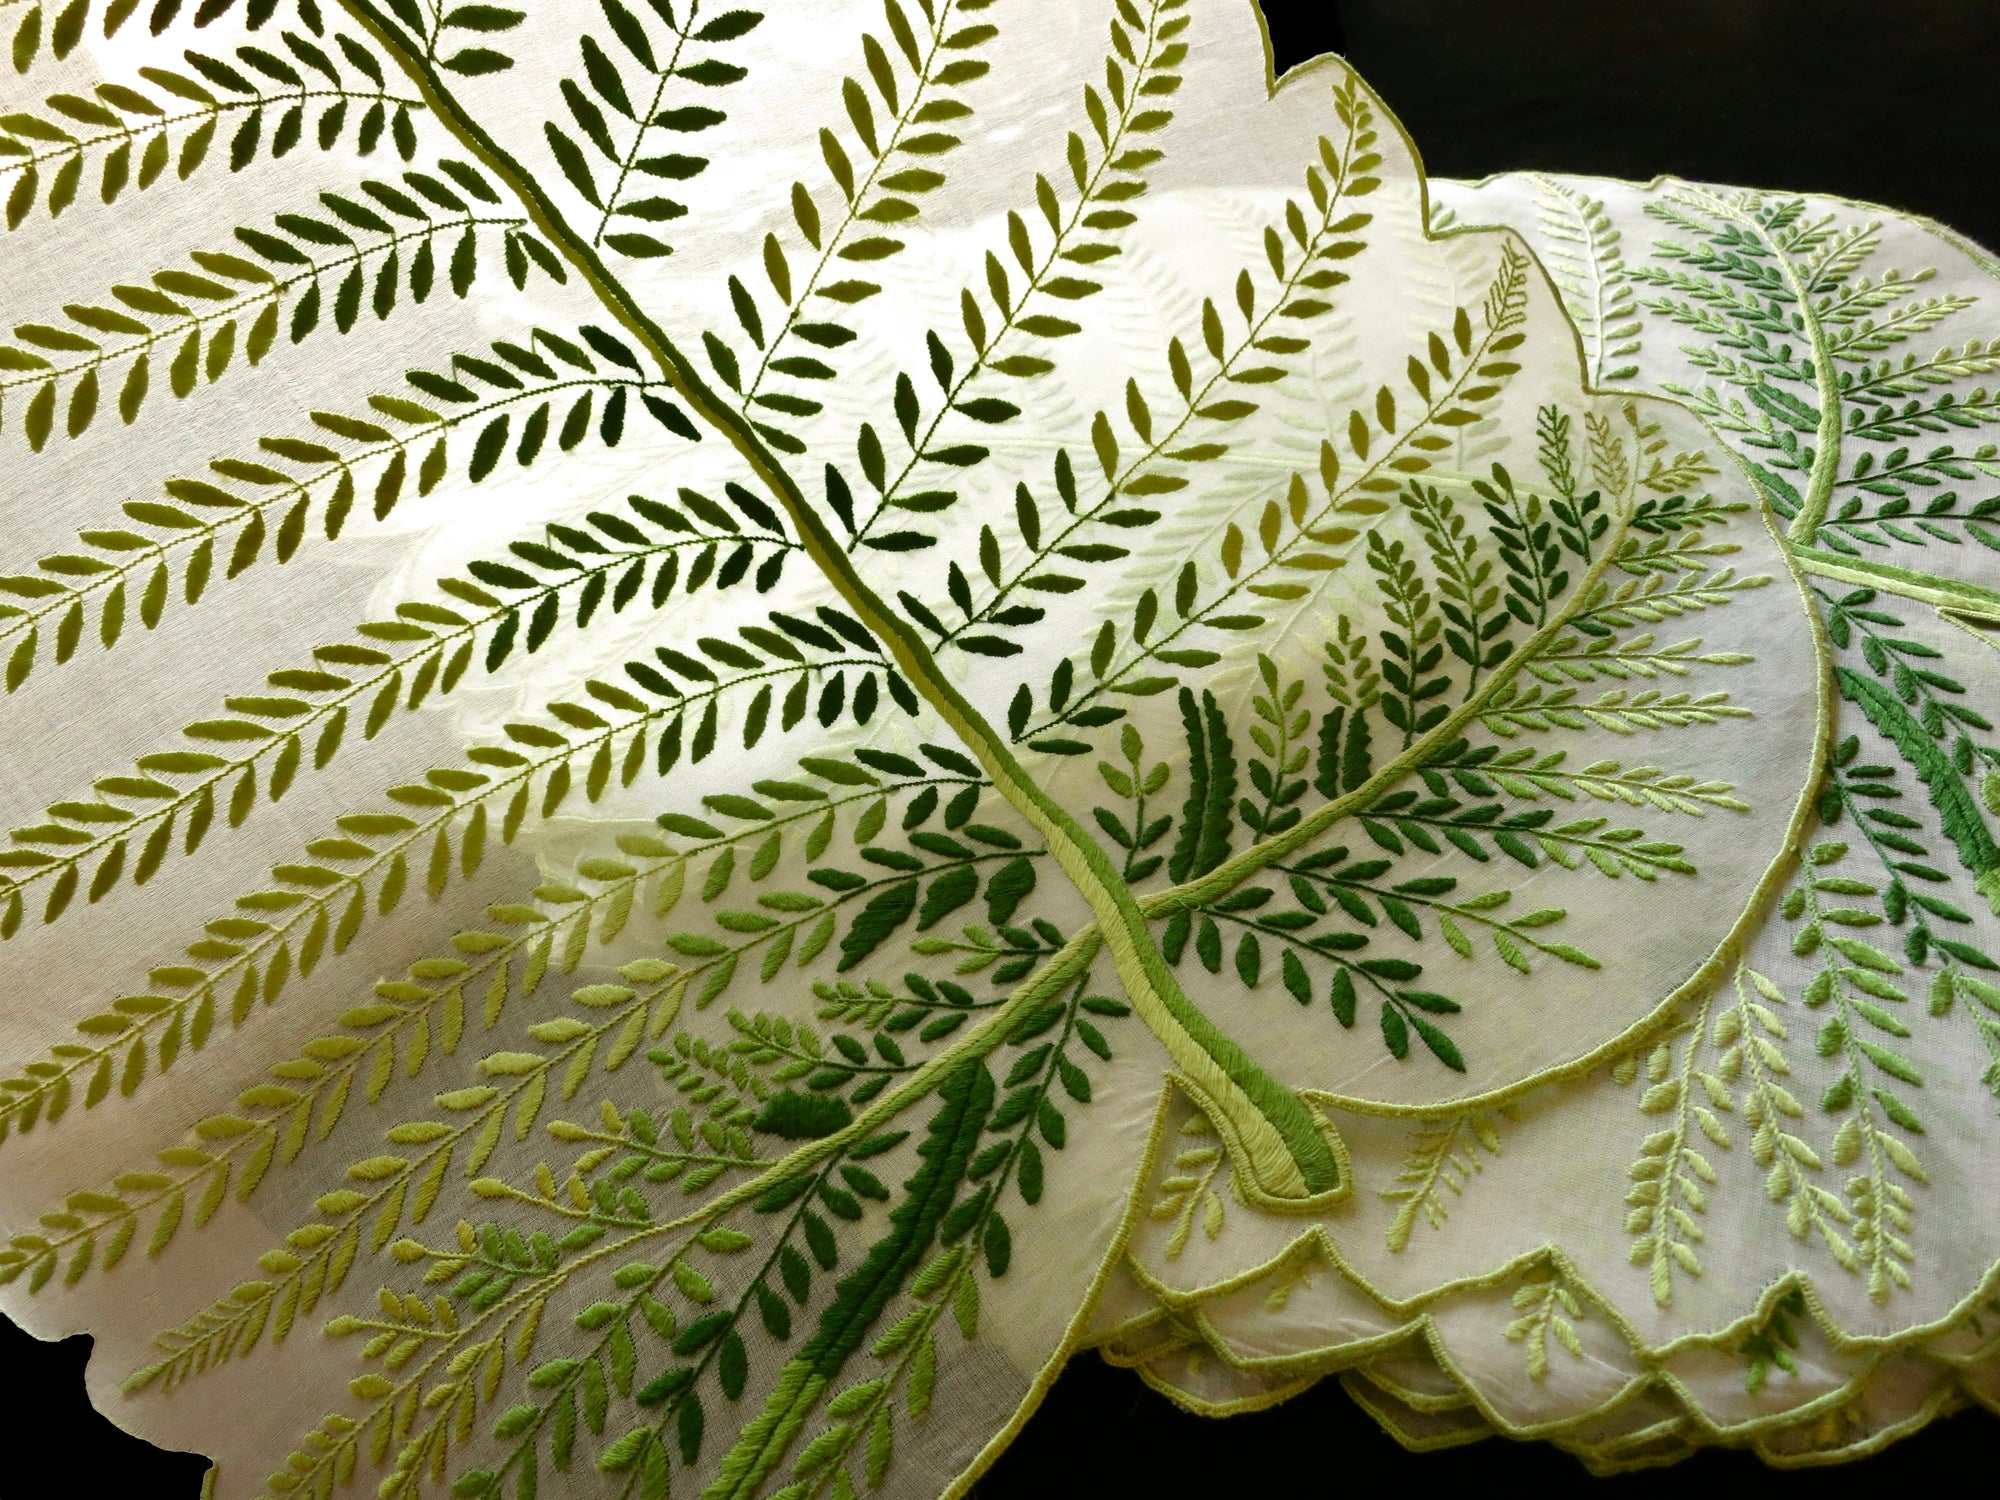 Green Leaves Vintage Madeira Embroidery Organdy Placemat Set for 8